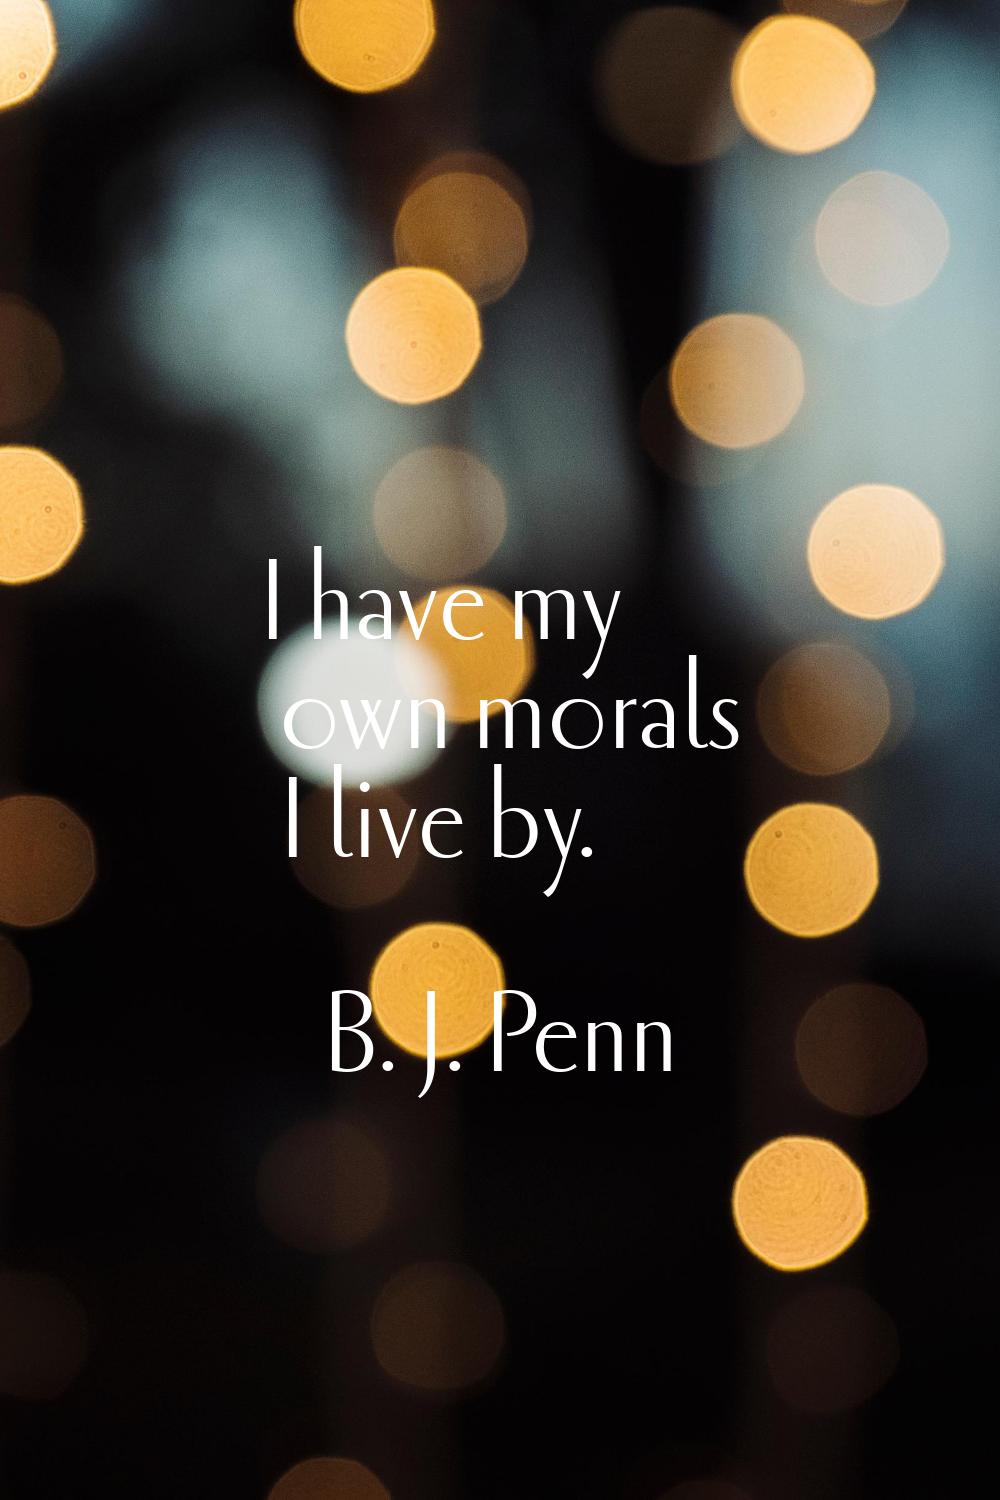 I have my own morals I live by.